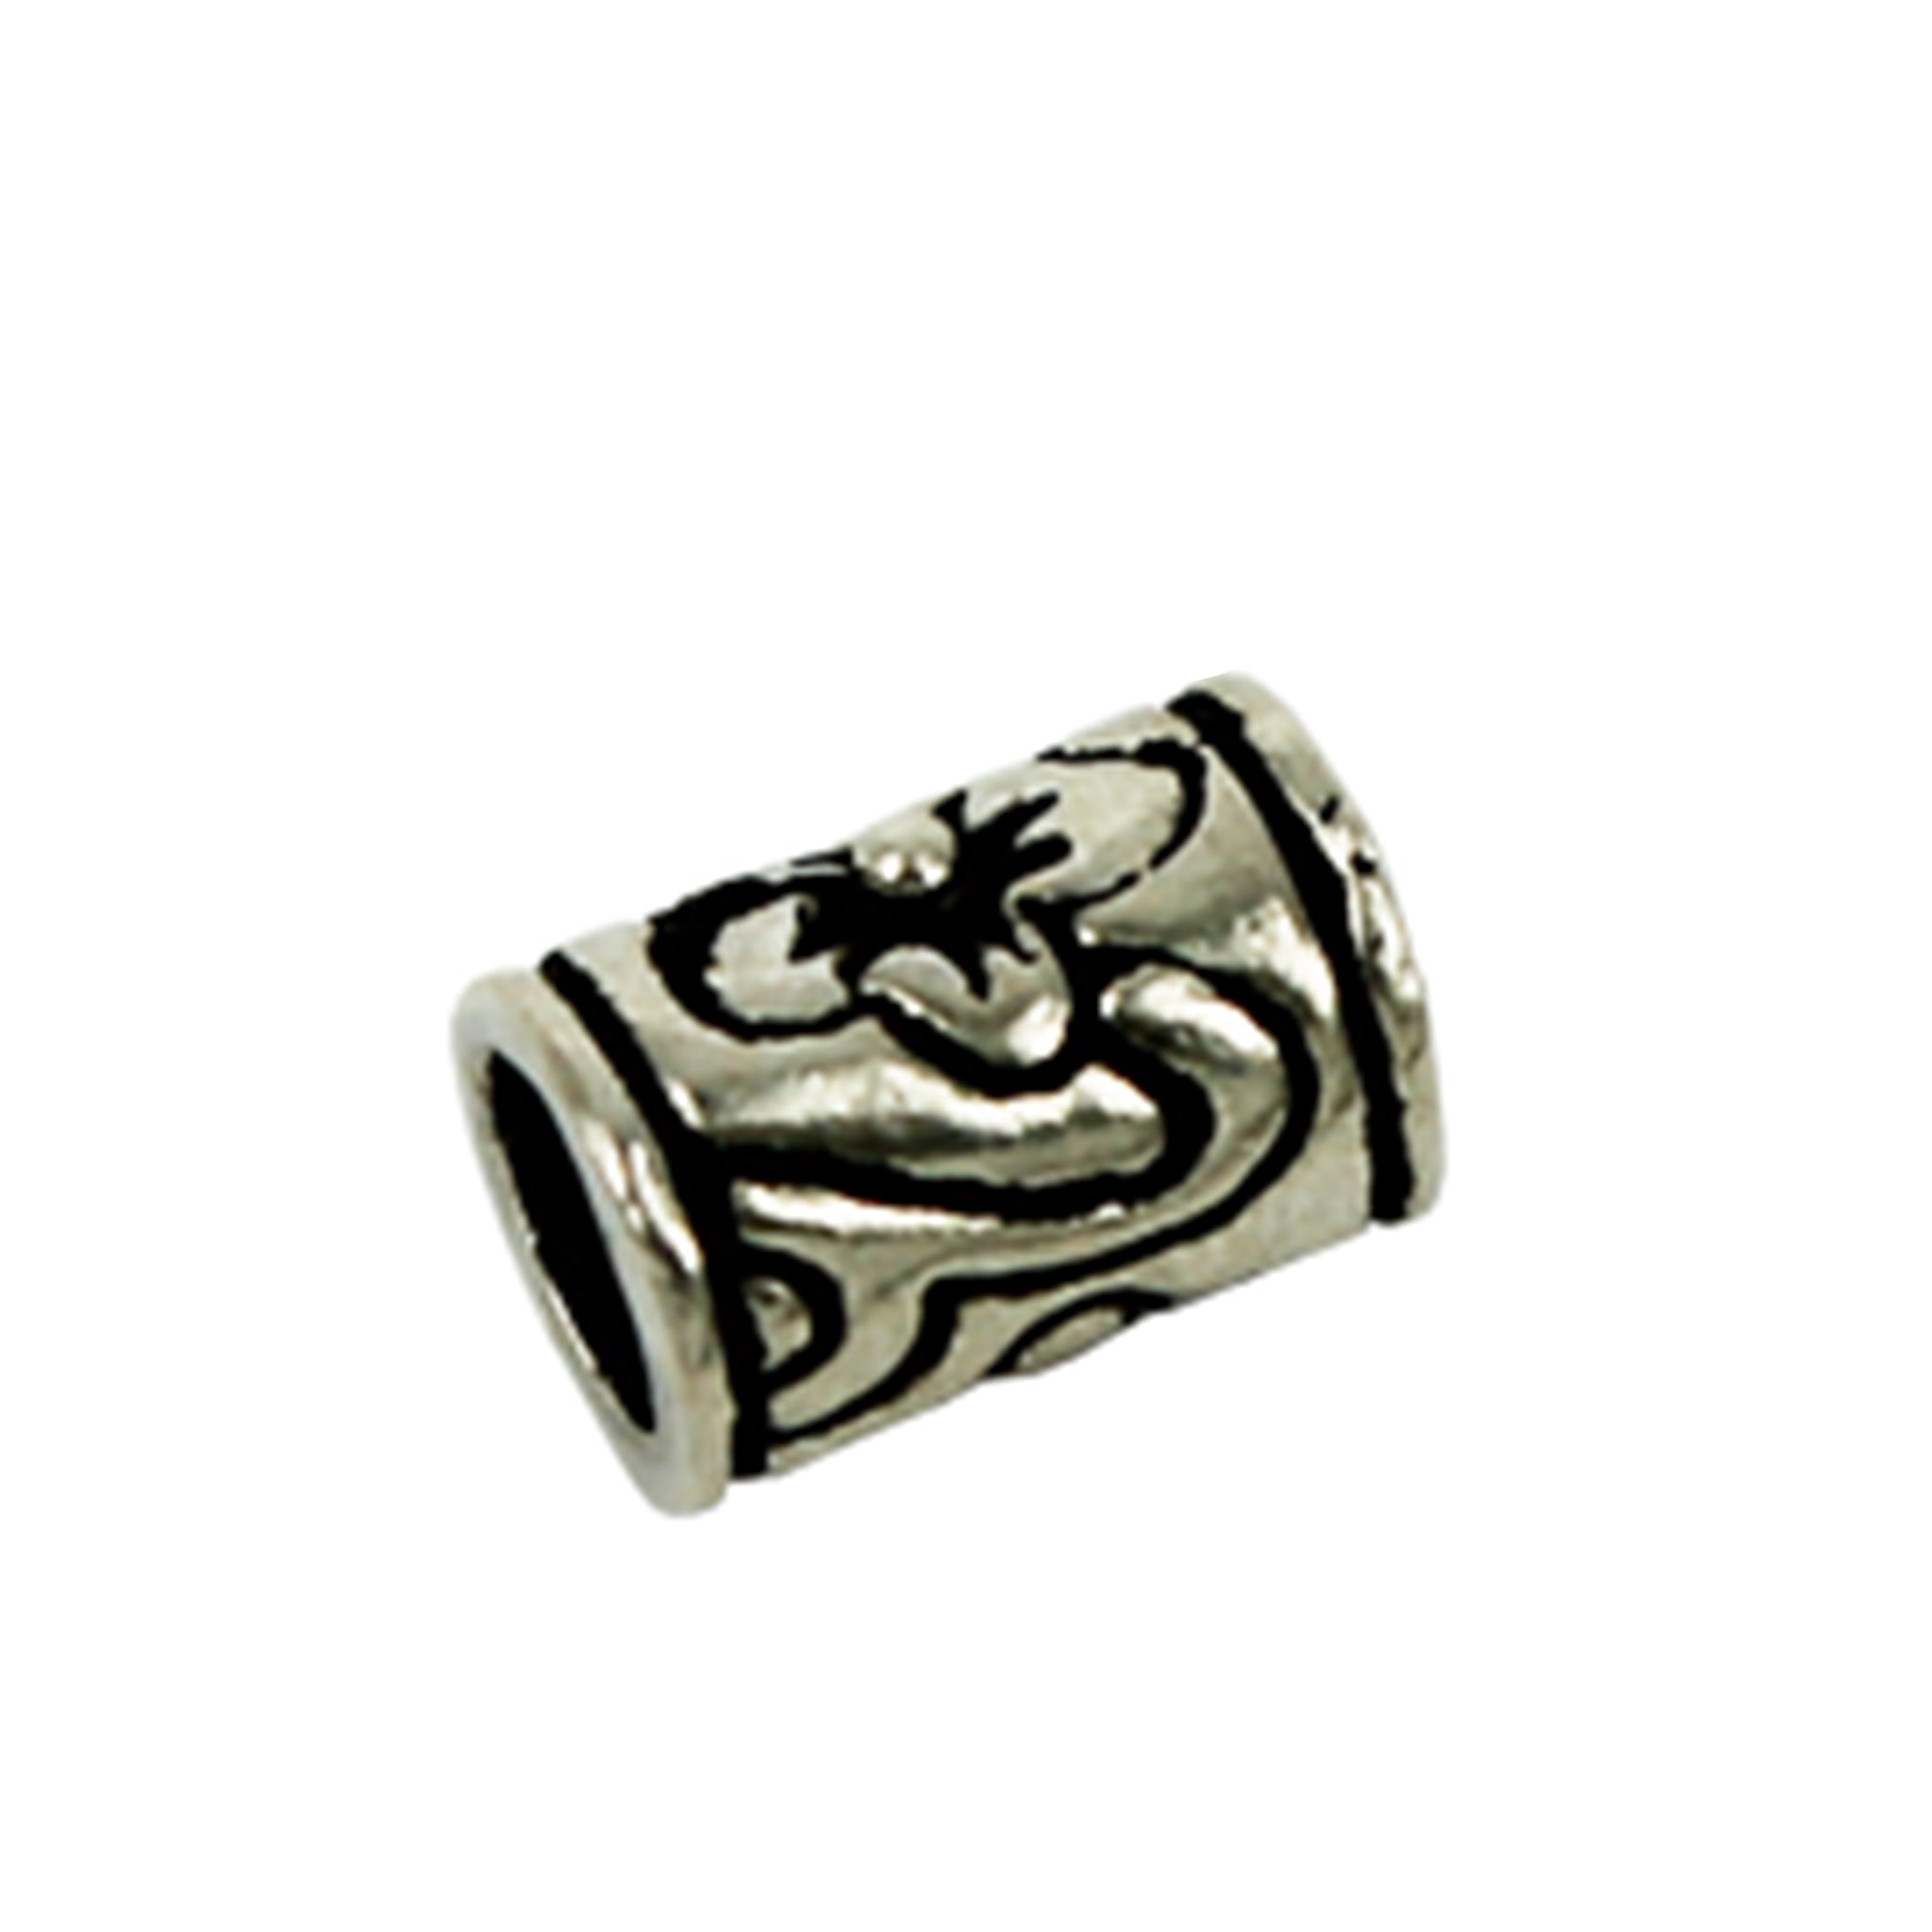 Frolic Tube Bead in Antique Sterling Silver 4x12mm